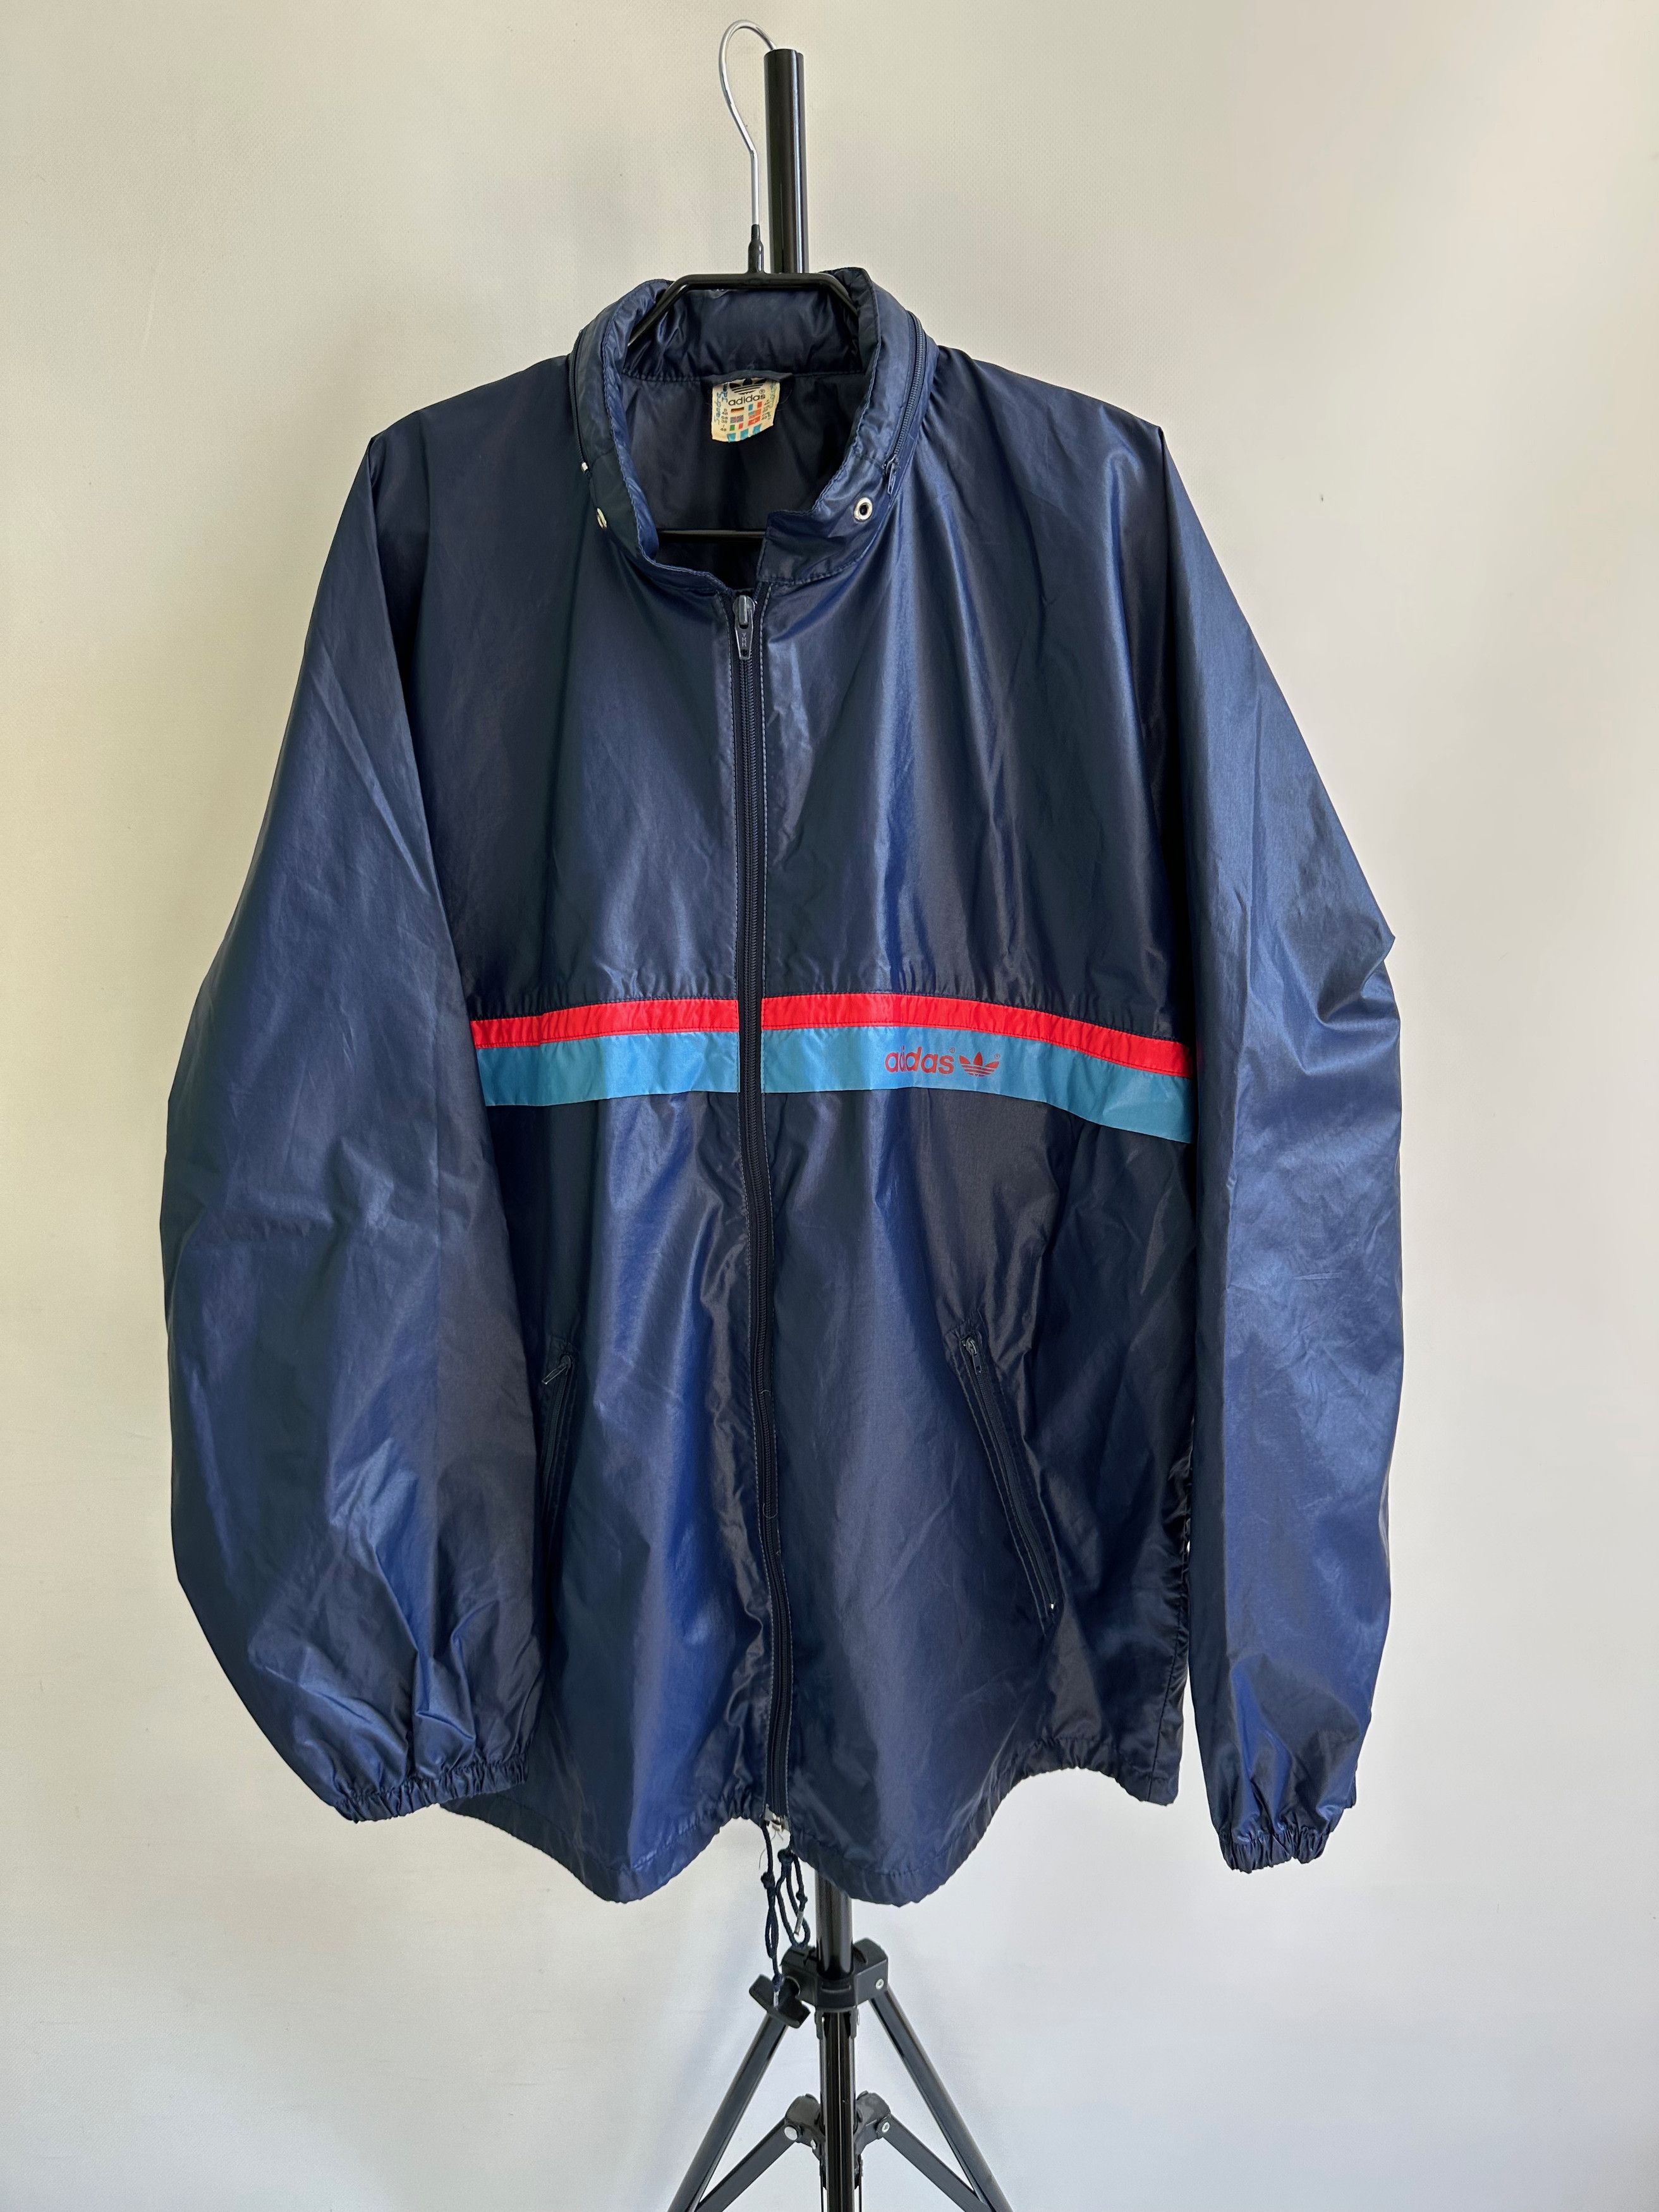 Adidas 80's - 90's ADIDAS raincoat nylon hooded packable jacket Size US M / EU 48-50 / 2 - 2 Preview